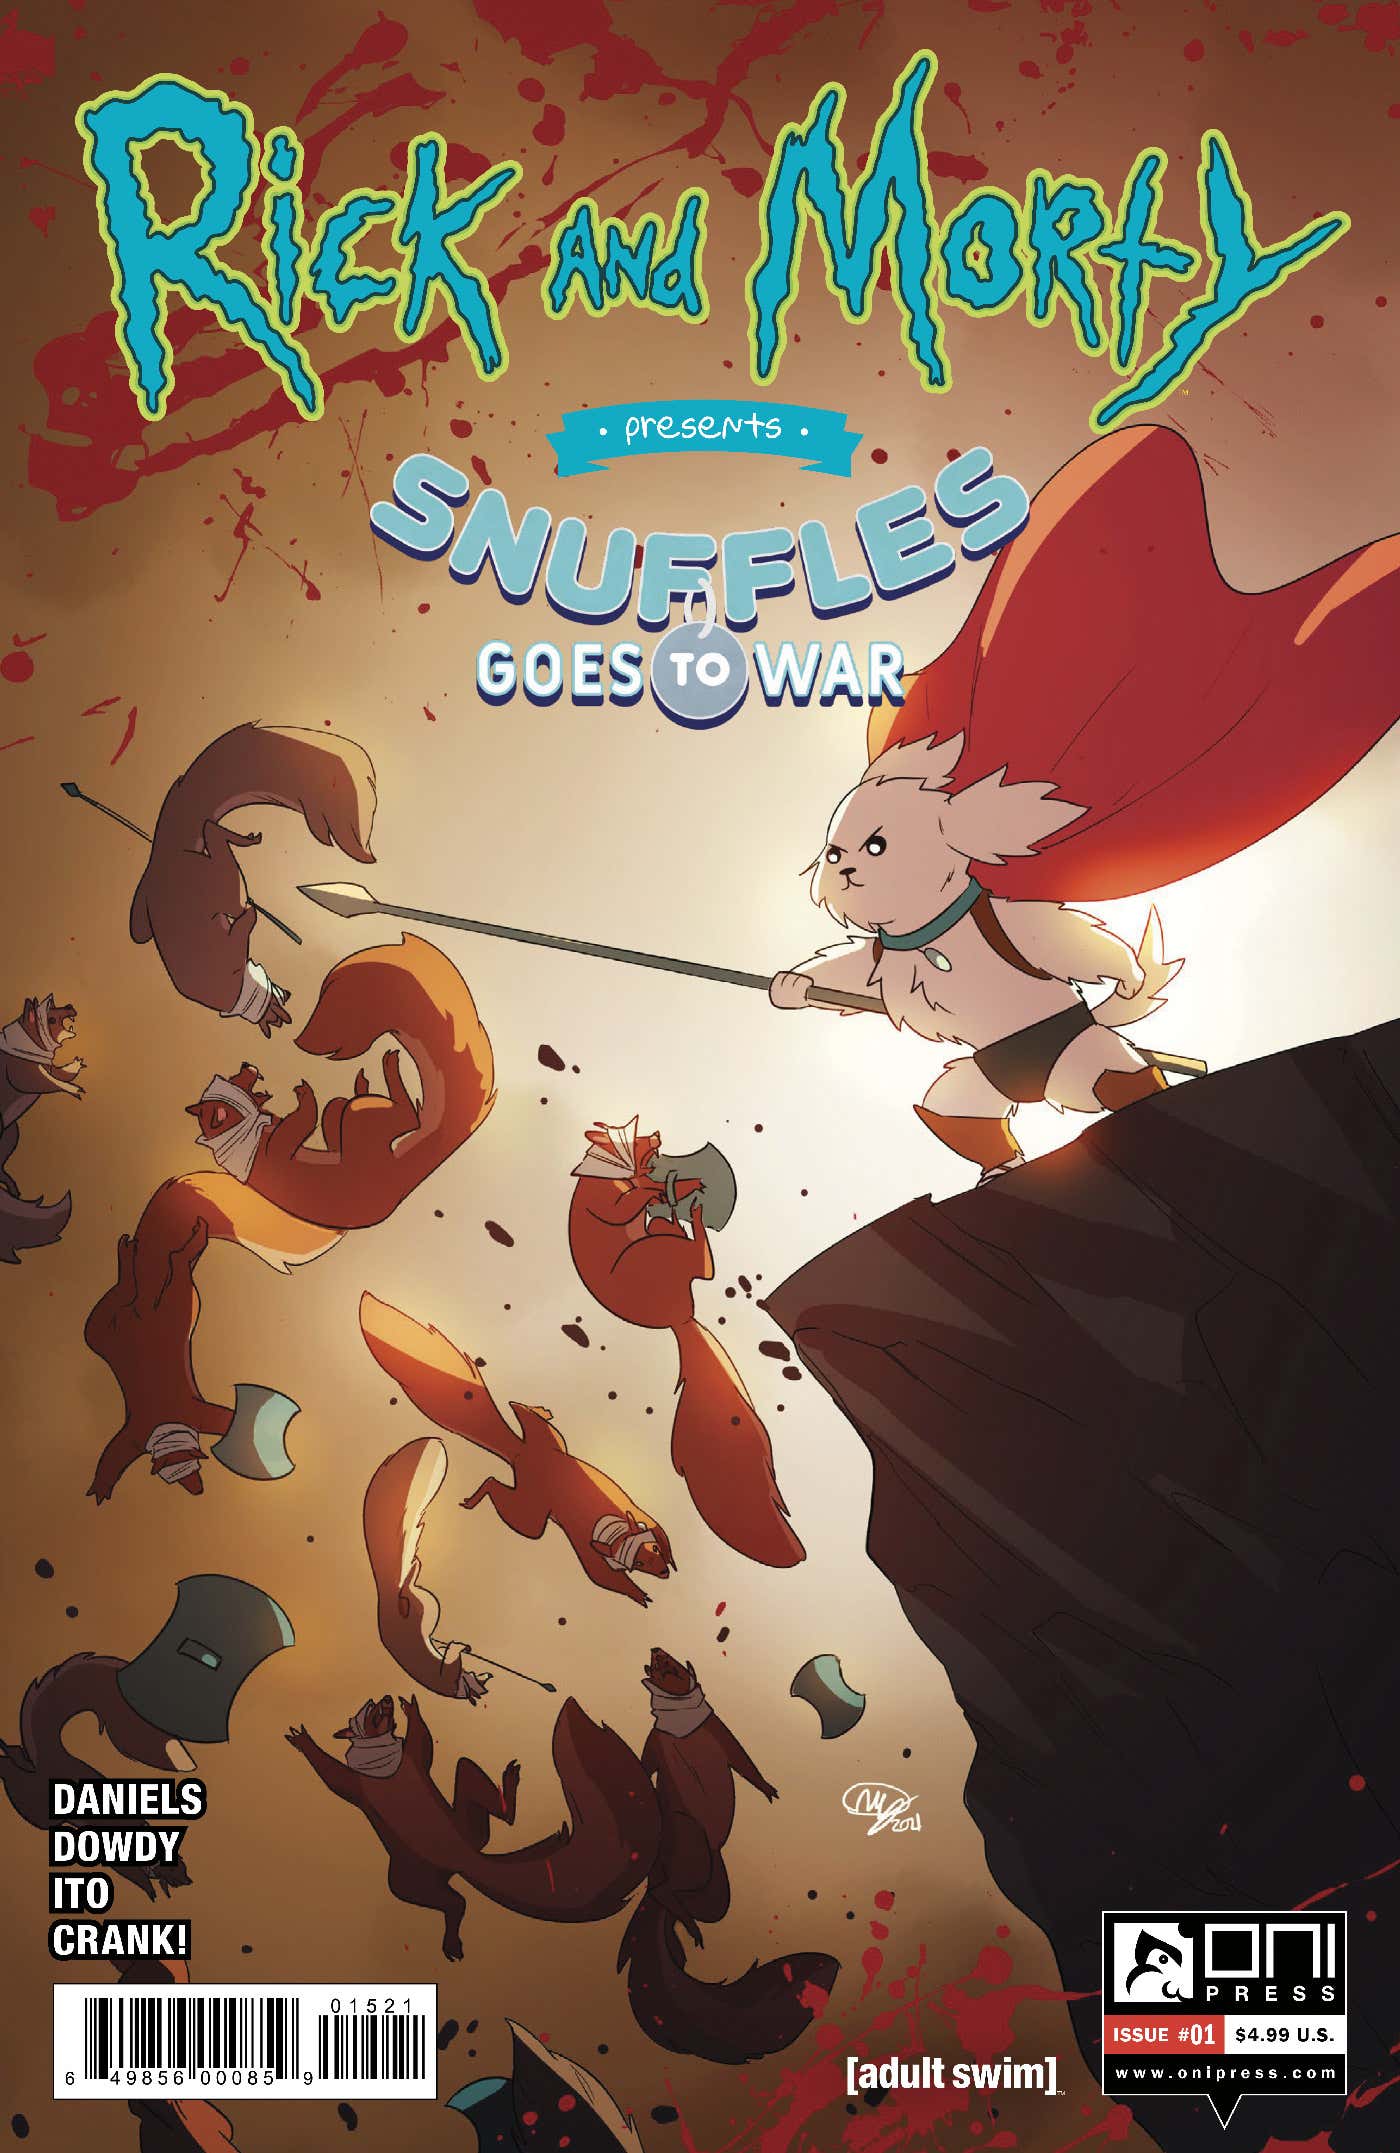 Rick and Morty Presents: Snuffles Goes to War no. 1 (2021) (Cover B)